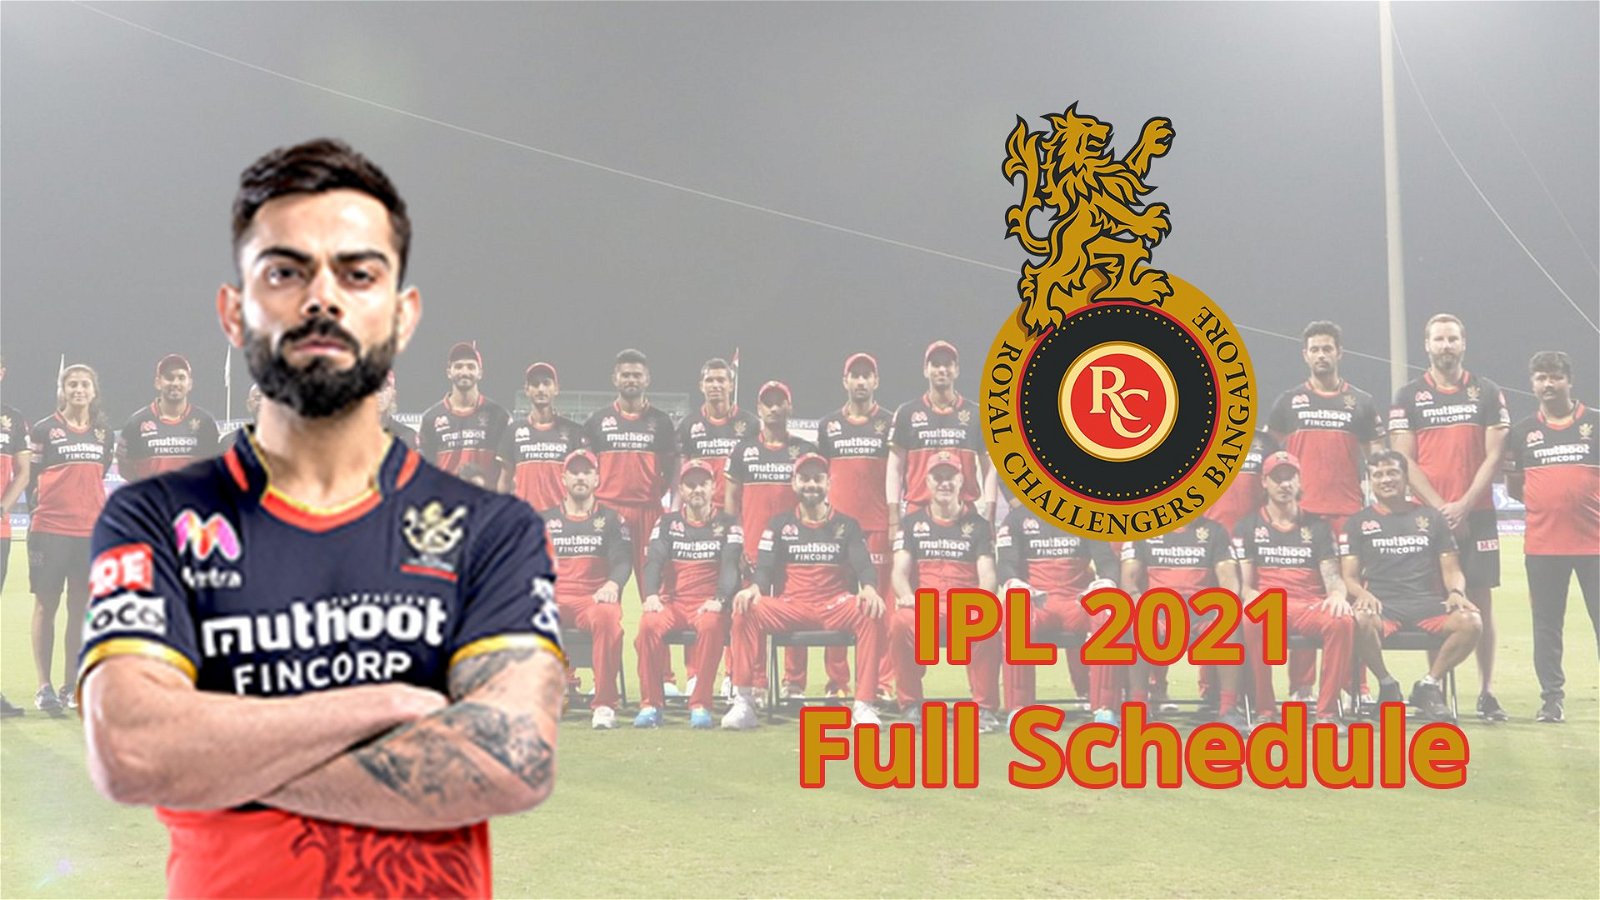 IPL 2021: Complete Schedule Of Royal Challengers Bangalore (RCB) For The Tournament